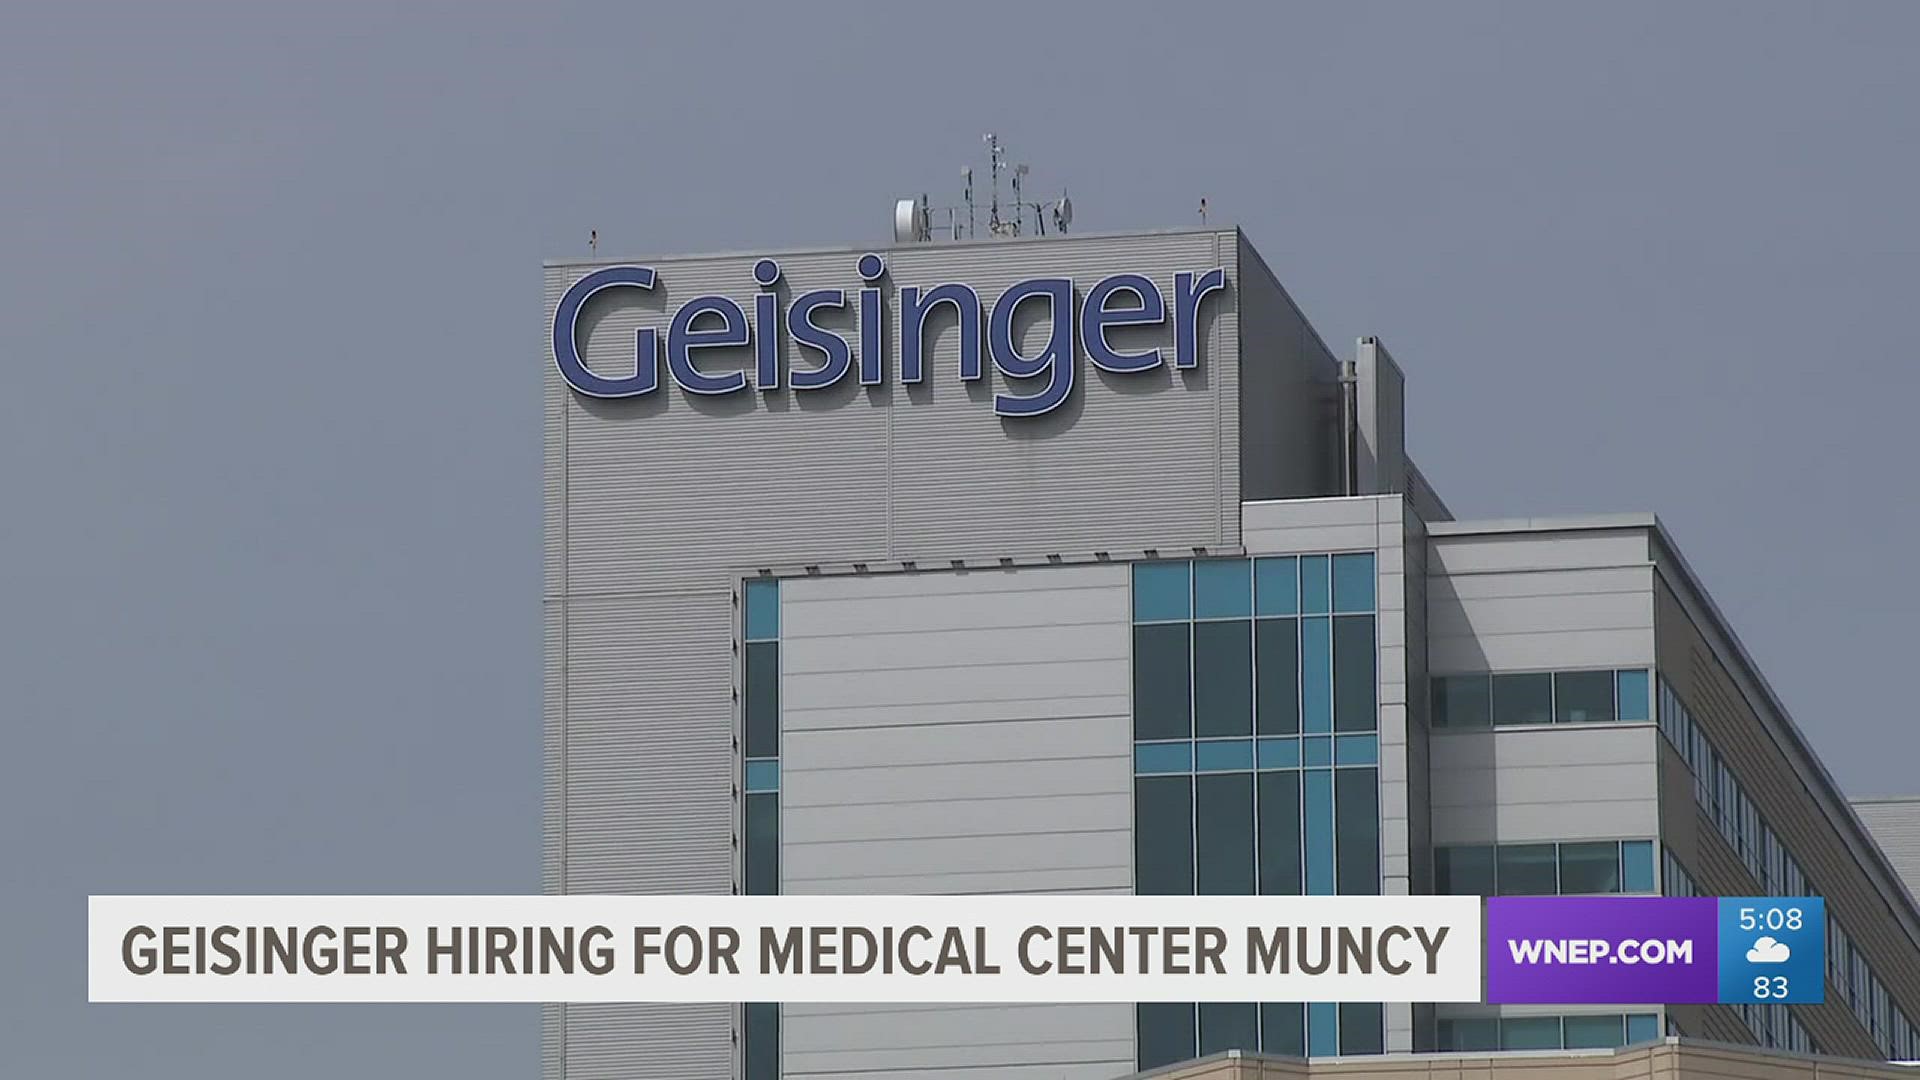 Geisinger Medical Center Muncy has more than 100 job positions available before the facility opens in the late fall.